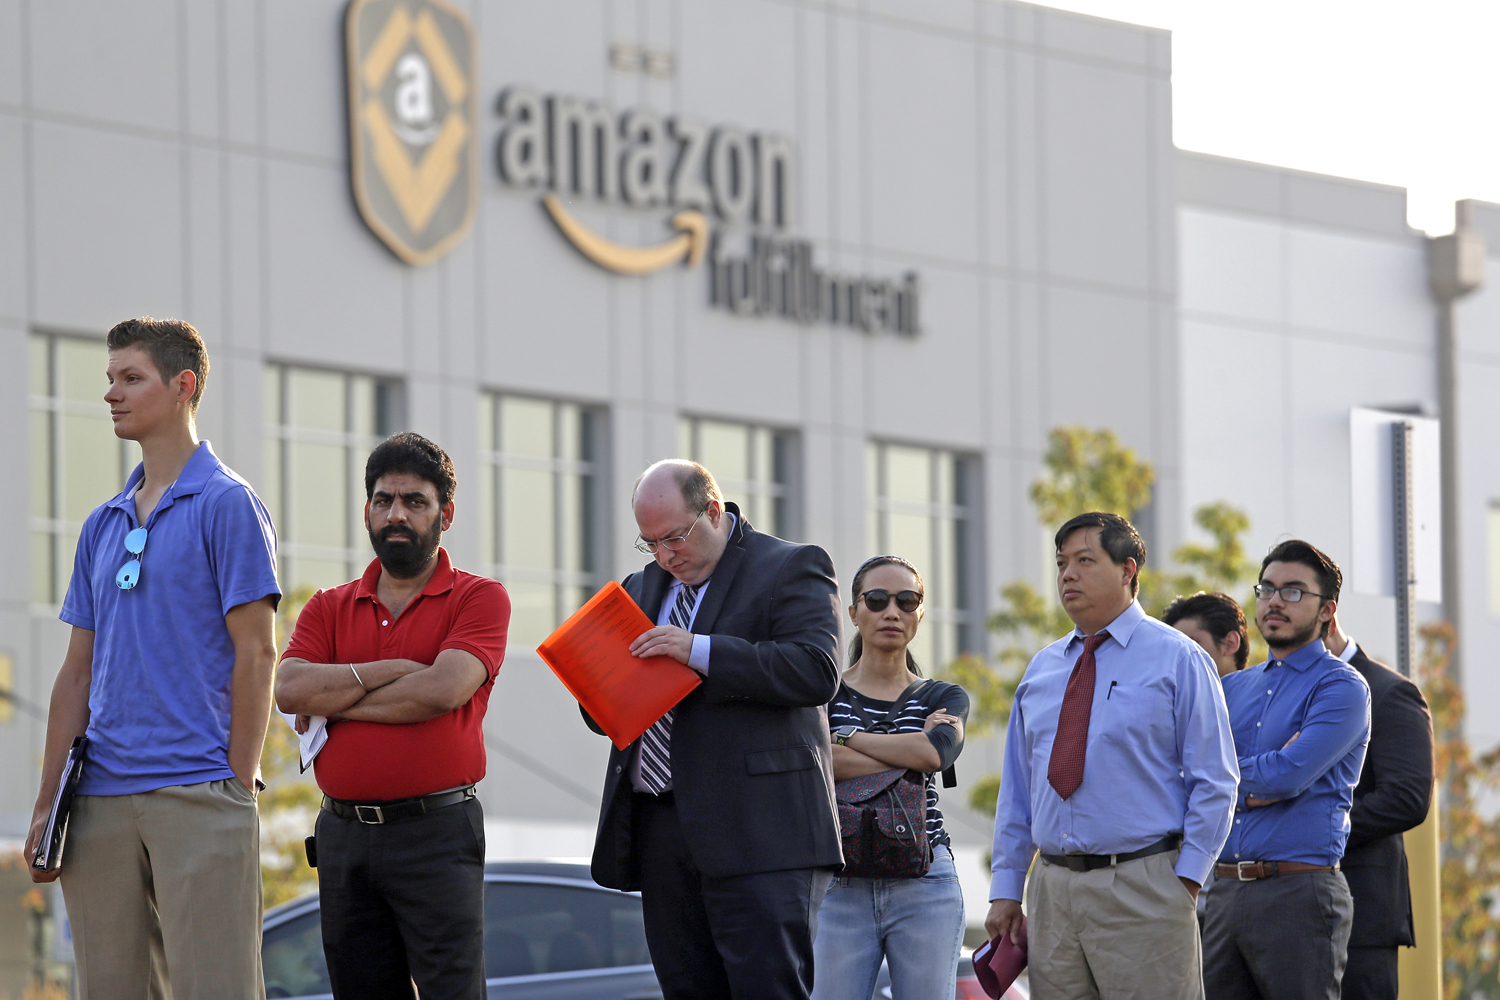 Applicants wait in line to enter a job fair, Wednesday, Aug. 2, 2017, at an Amazon fulfillment center, in Kent, Wash. (Elaine Thompson/AP)